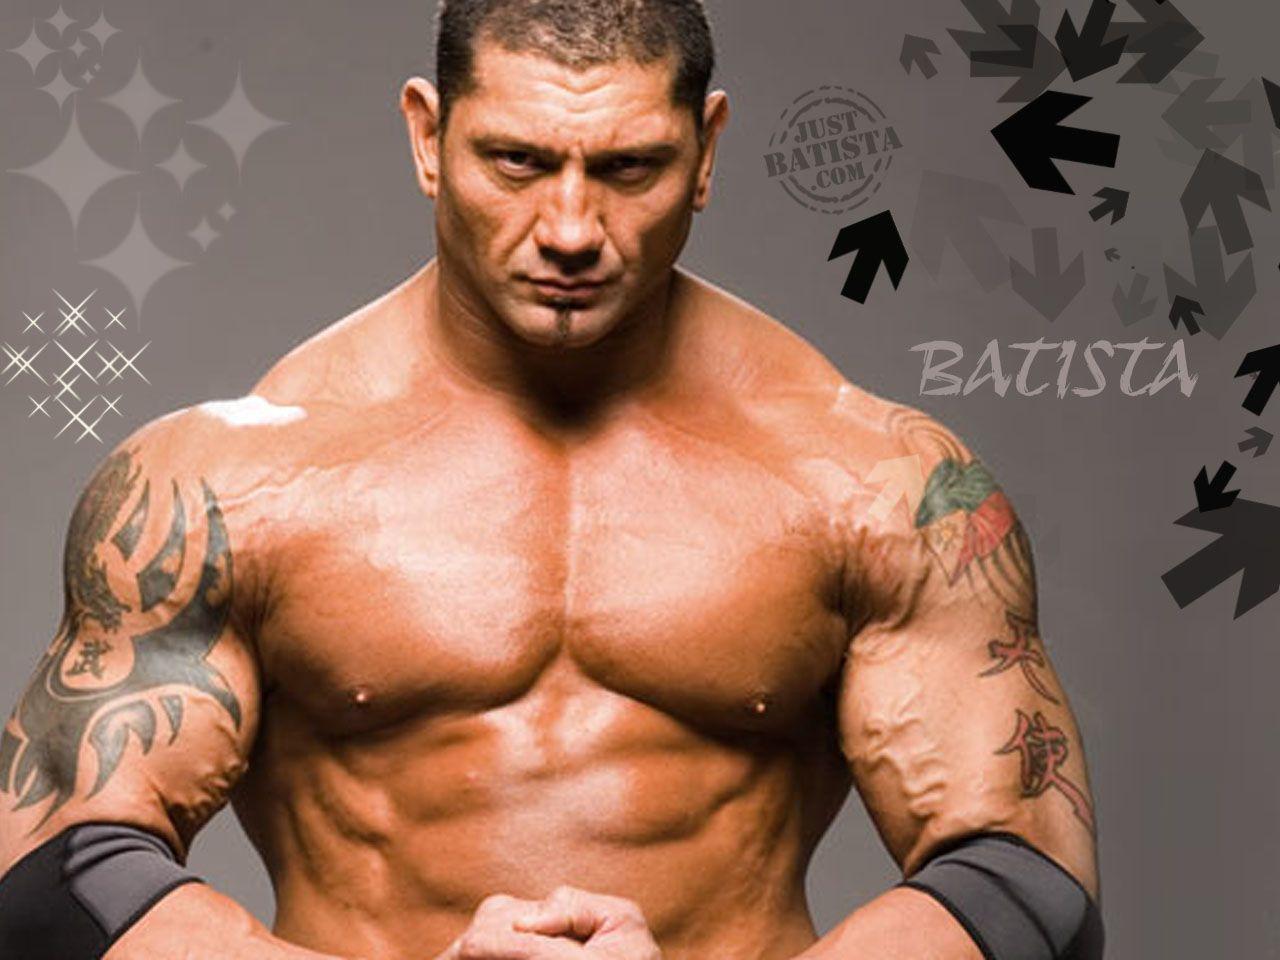 Dave Batista Wwe Profile And Latest Wallpaper. All Sports Stars